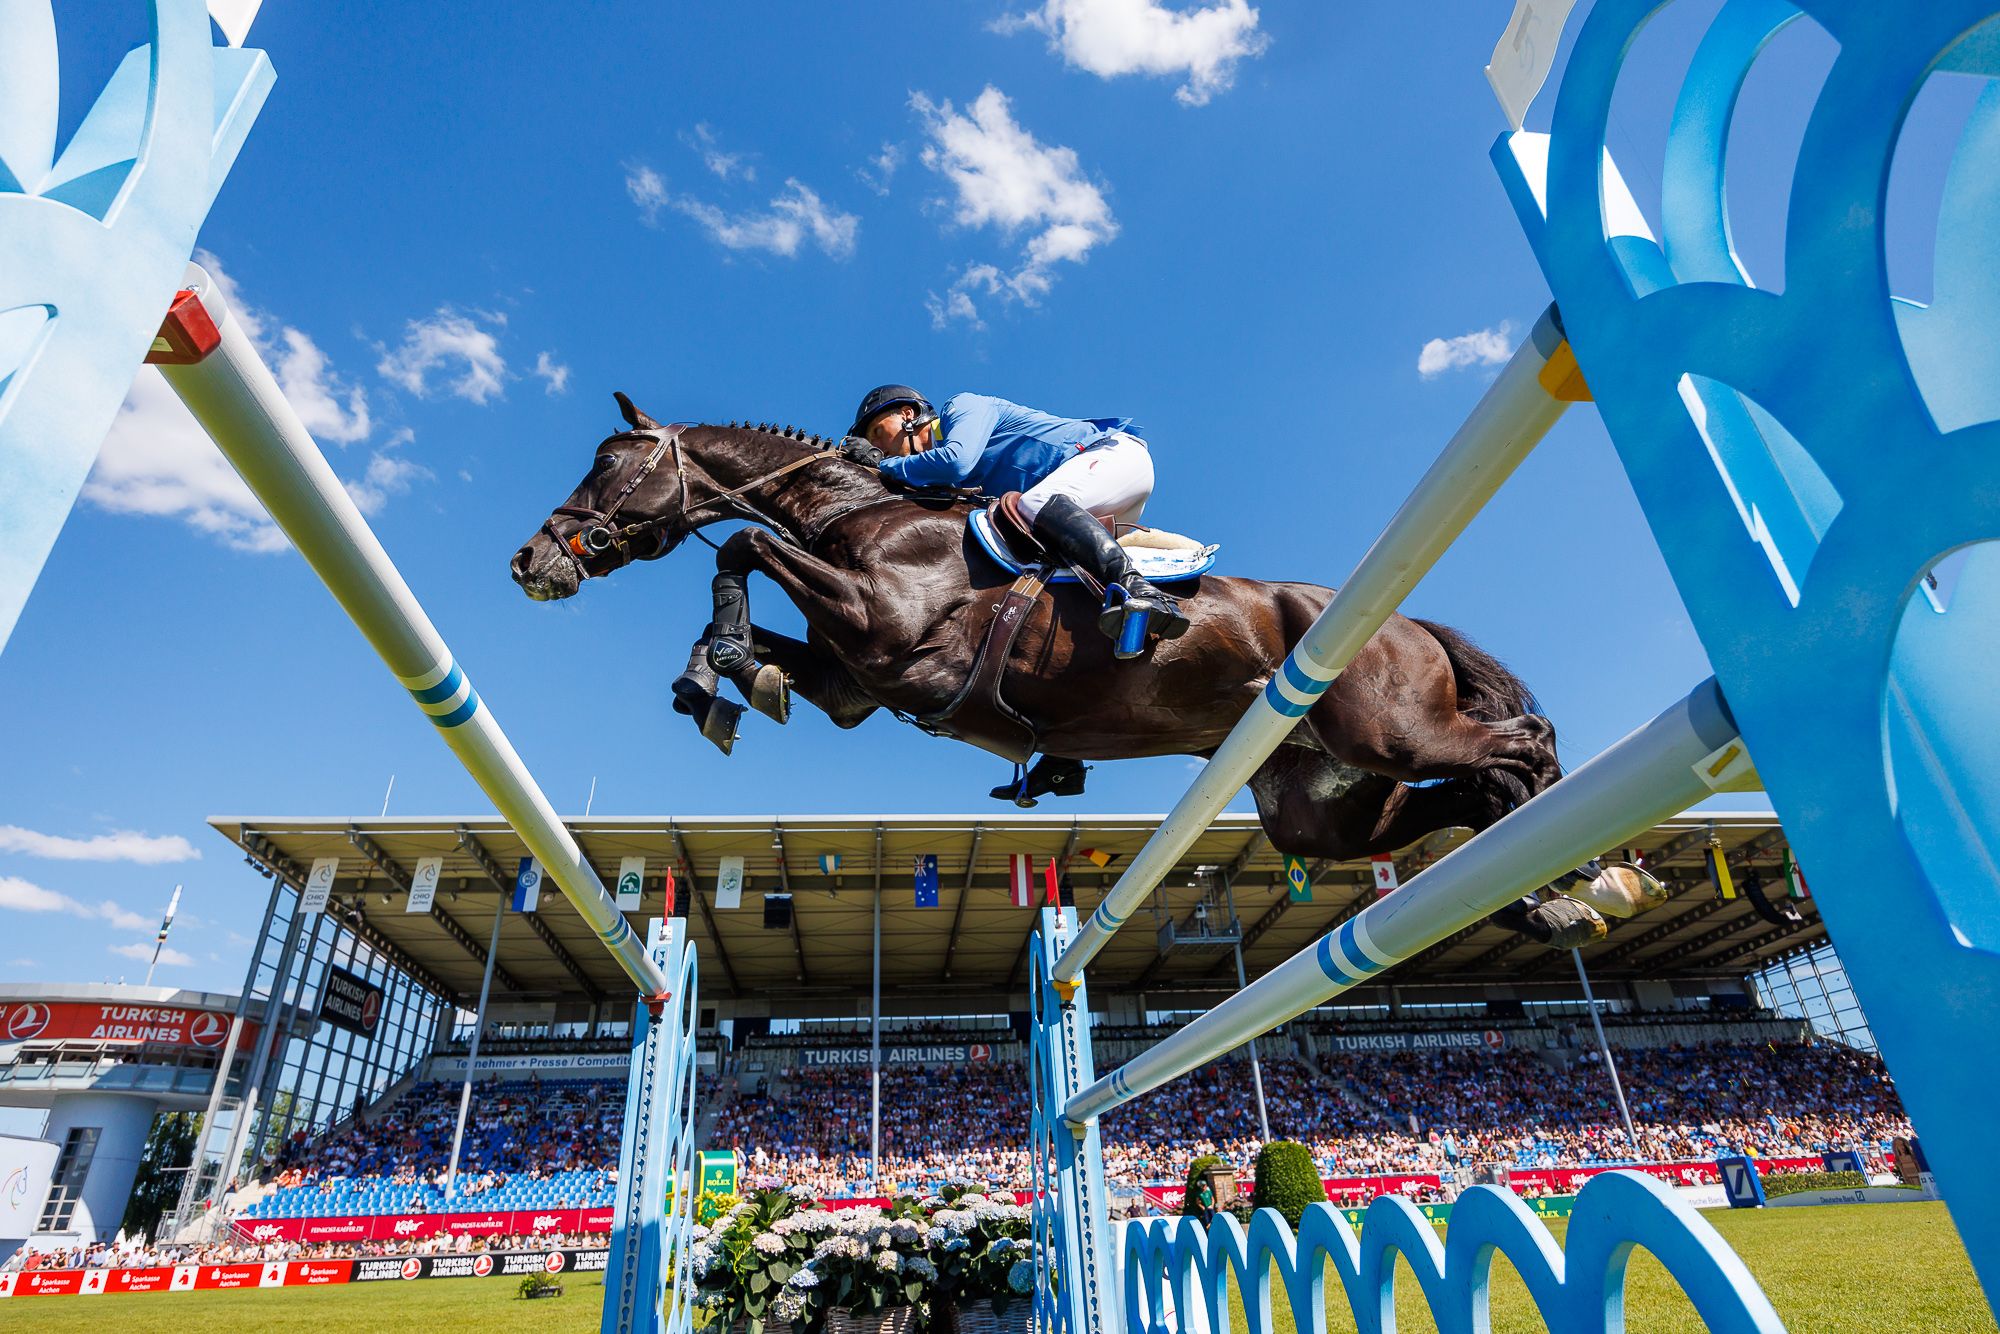 Home win for Christian Ahlmann in Allianz-Prize of CHIO Aachen